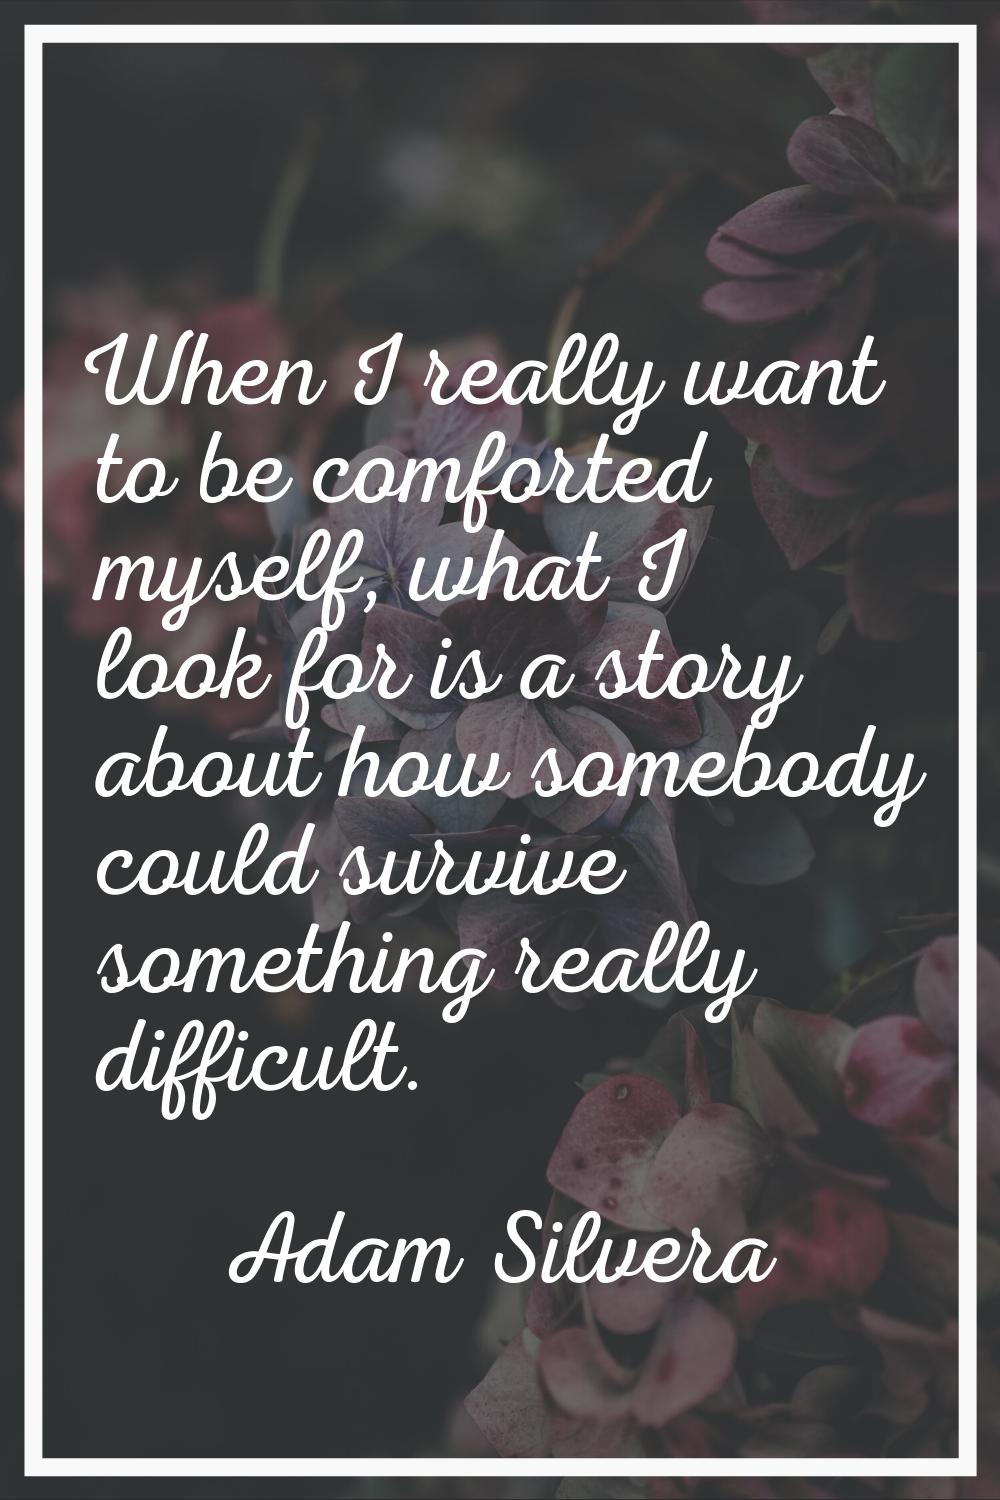 When I really want to be comforted myself, what I look for is a story about how somebody could surv